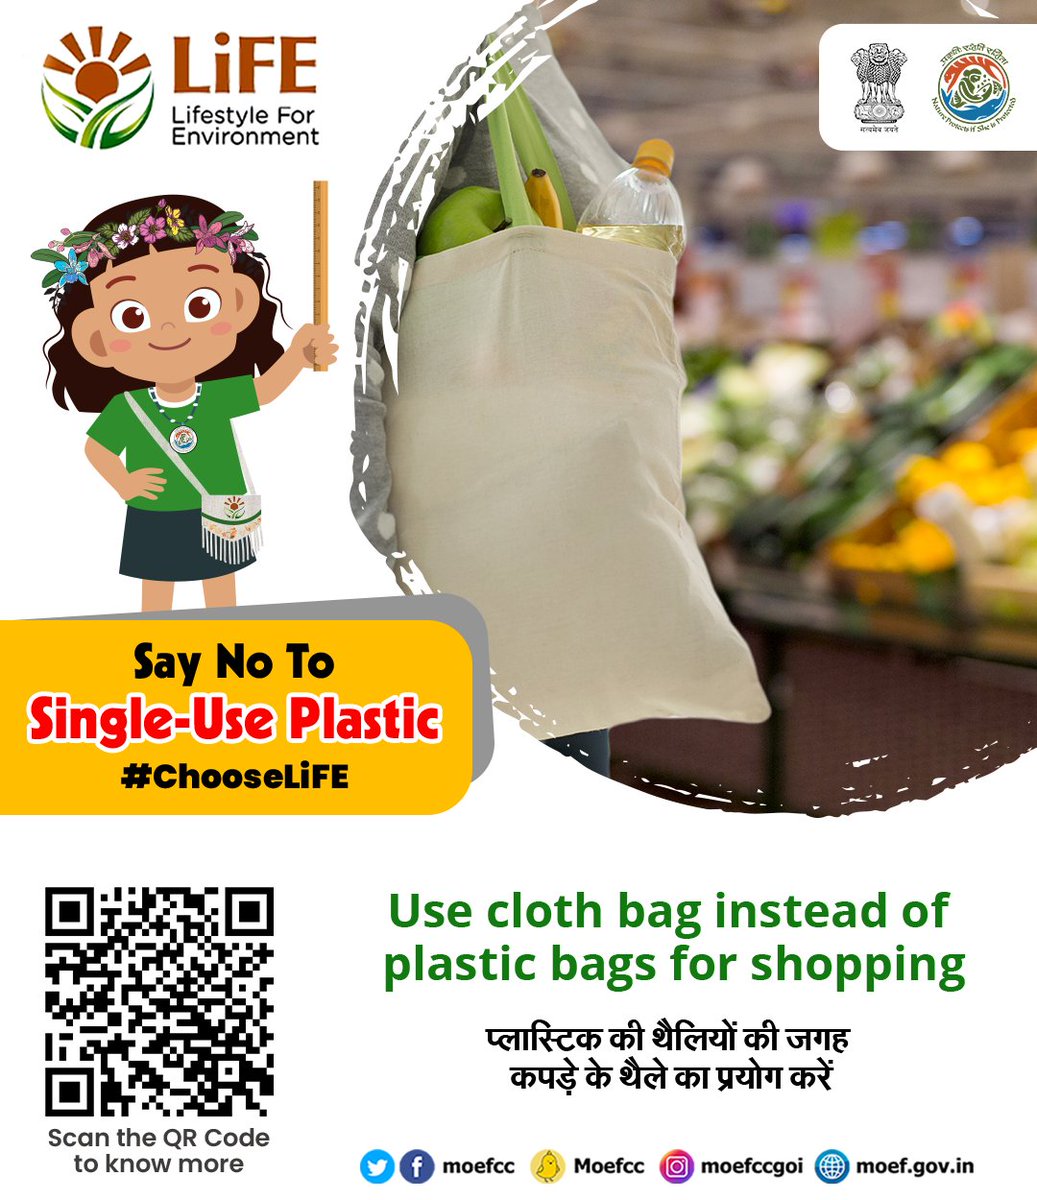 🌏 Let's make a positive impact on the environment by switching to 𝗰𝗹𝗼𝘁𝗵 𝗯𝗮𝗴𝘀 🛍️! 🌿

🚫 Say no to plastic bags and reduce waste. #GoGreen @MIB_India @moefcc @SwachhBharatGov #Swachhata #SustainableLiving #PlasticFree #ReduceReuseRecycle #EnvironmentallyFriendly